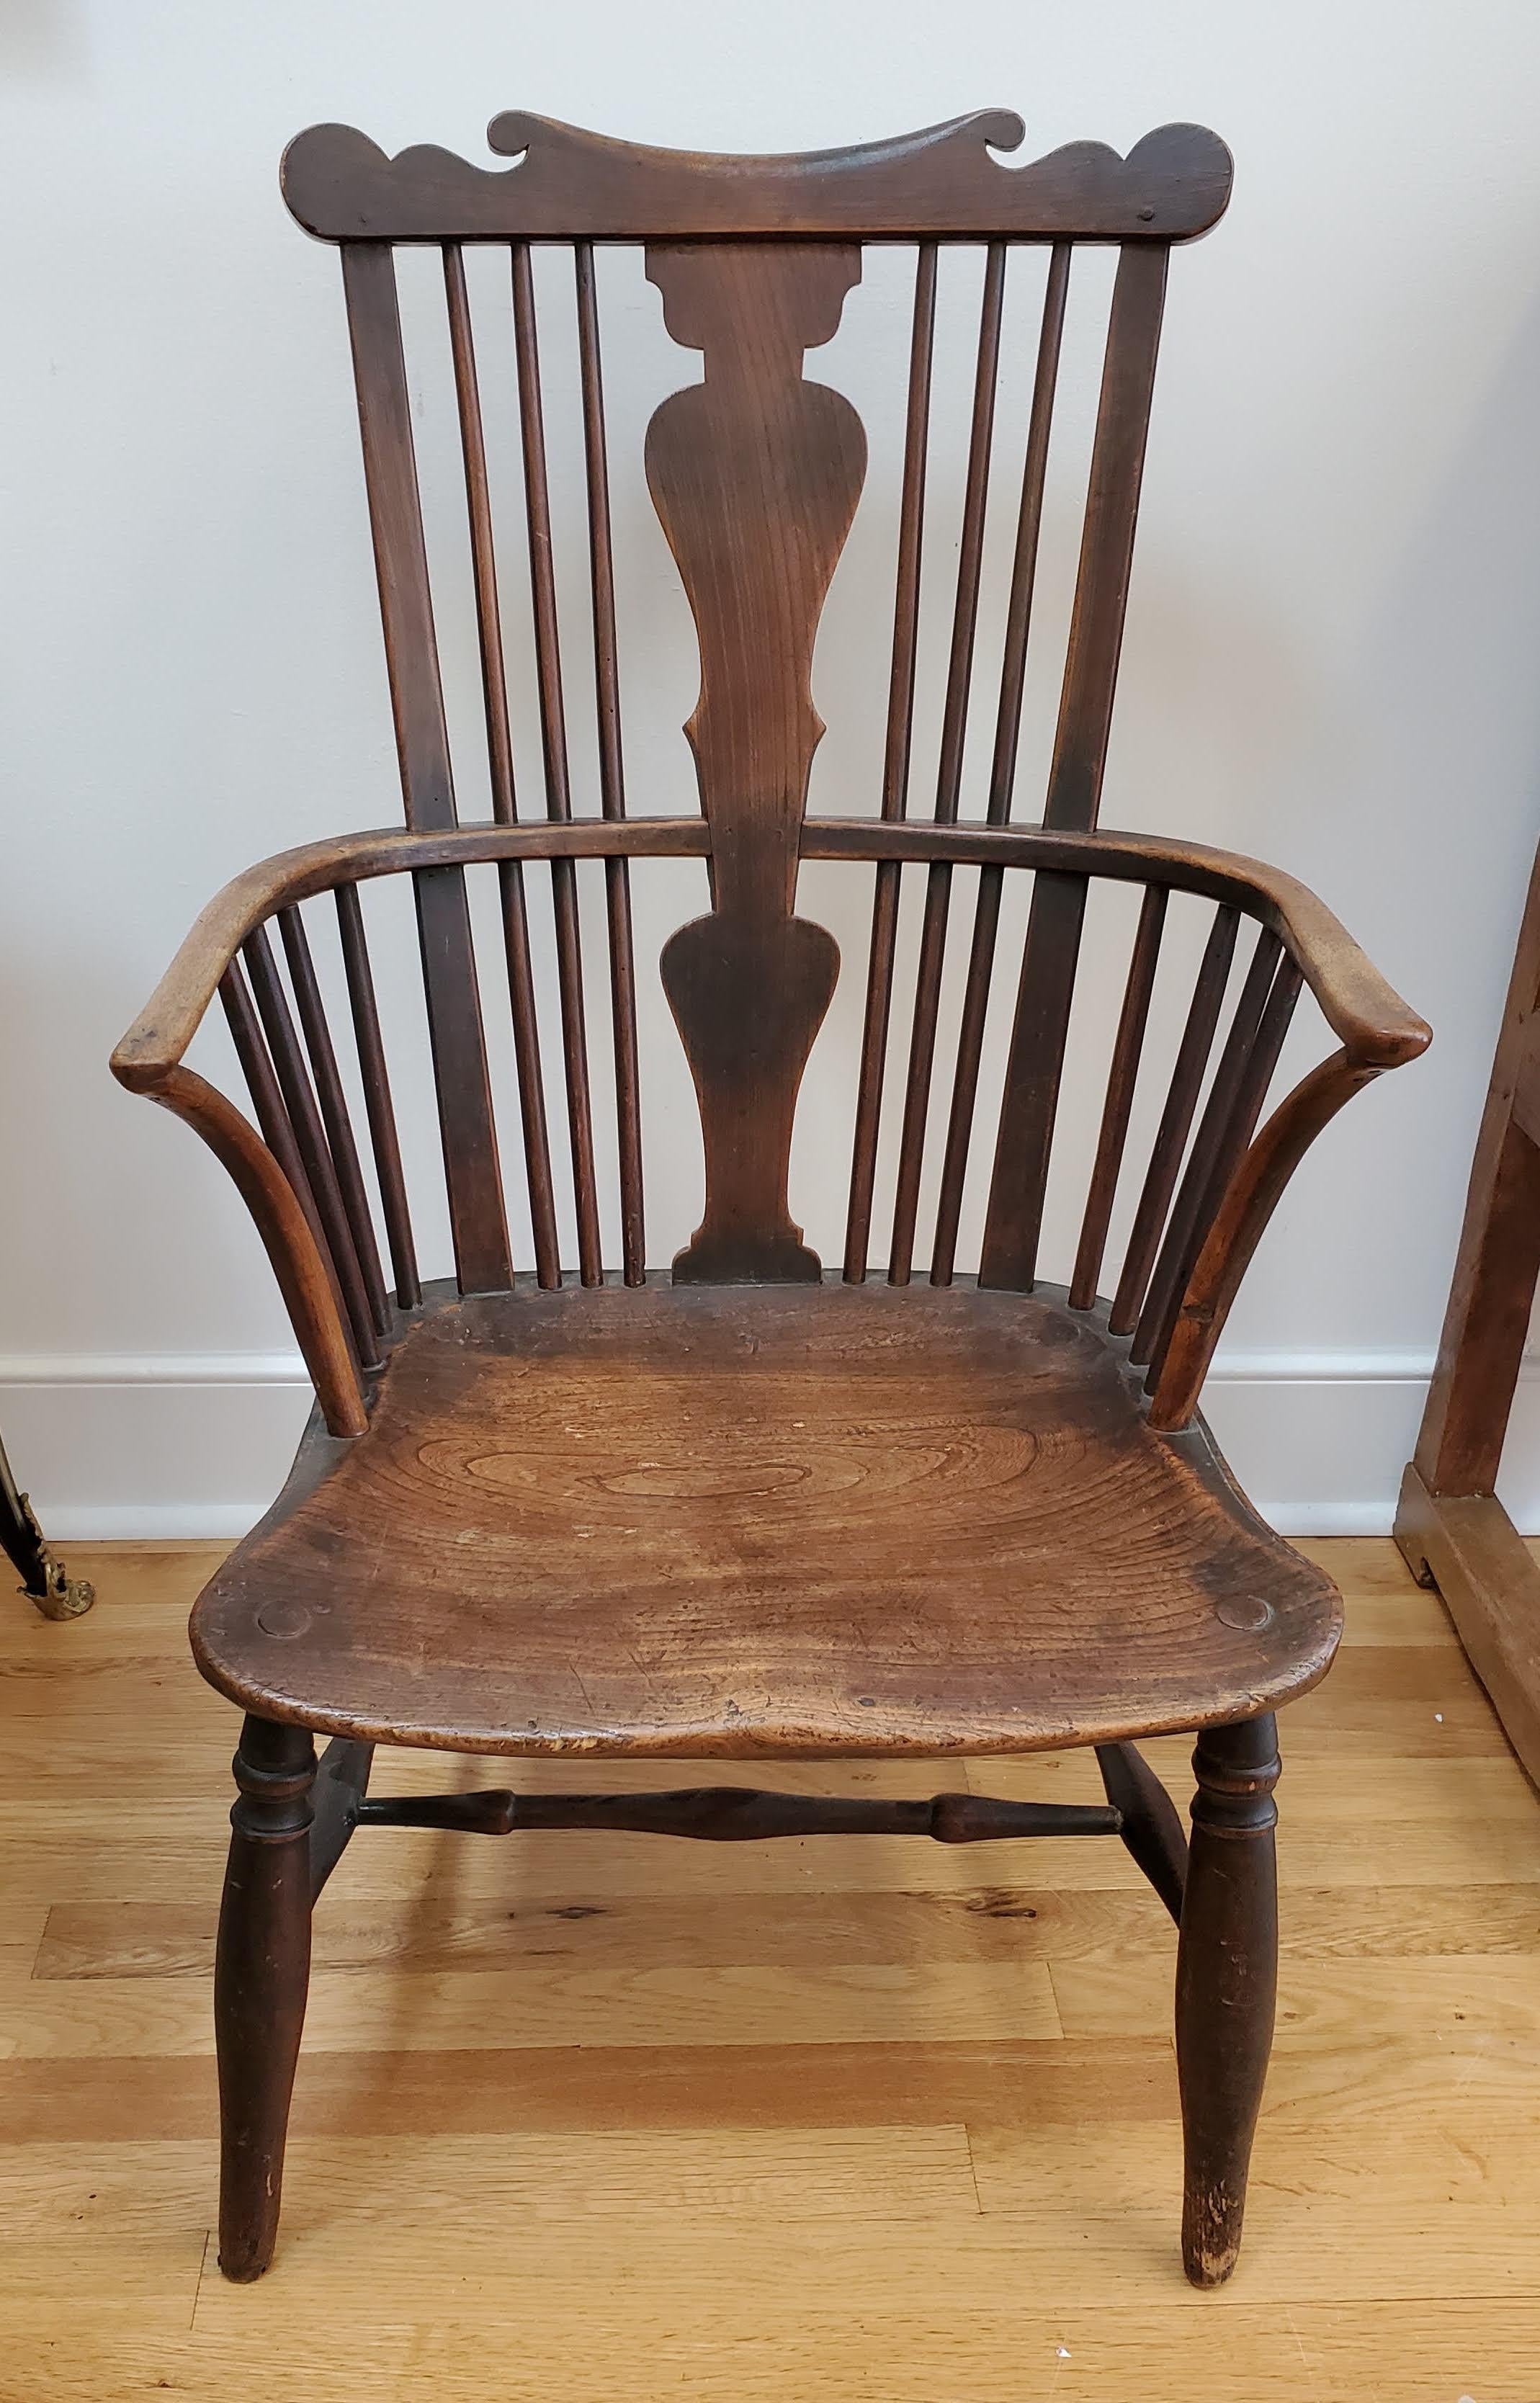 18th century English comb back windsor armchair. Shaped comb top rail over central splat and bowed arms with shaped figured elm seat and delicate turned legs. A mixture of elm, ash and walnut with a rich lustrous patination. Small proportions.